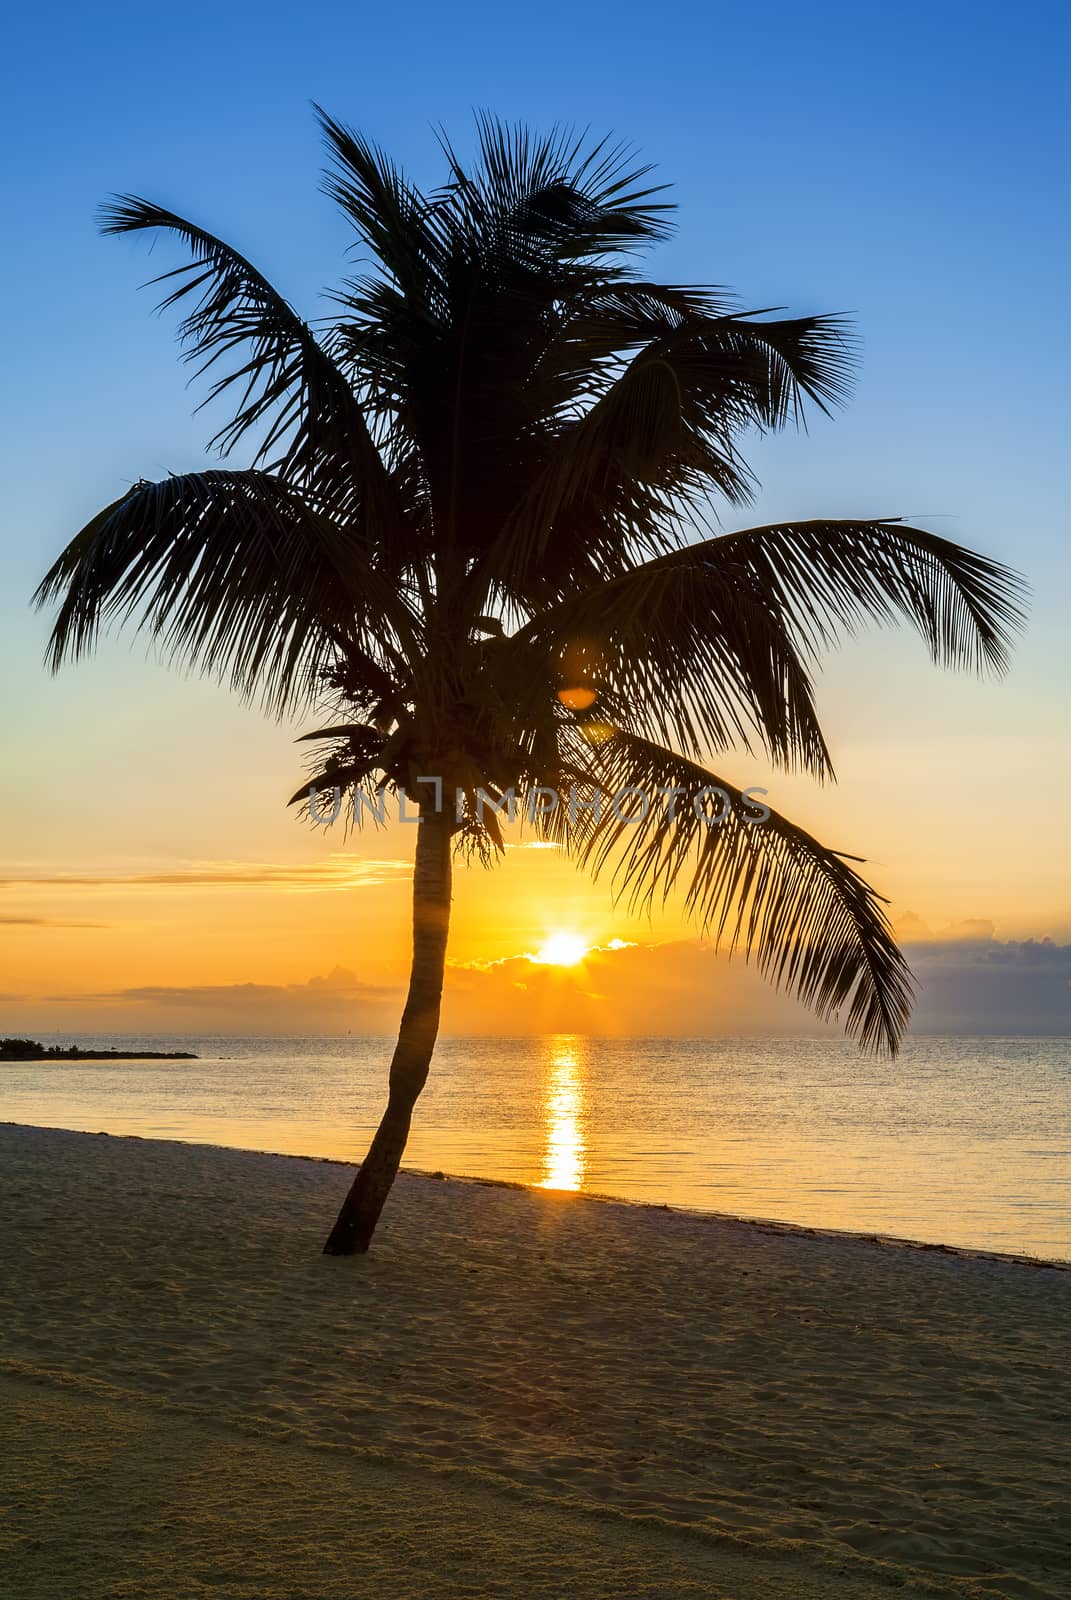 palm tree on a beach at sunset by vwalakte